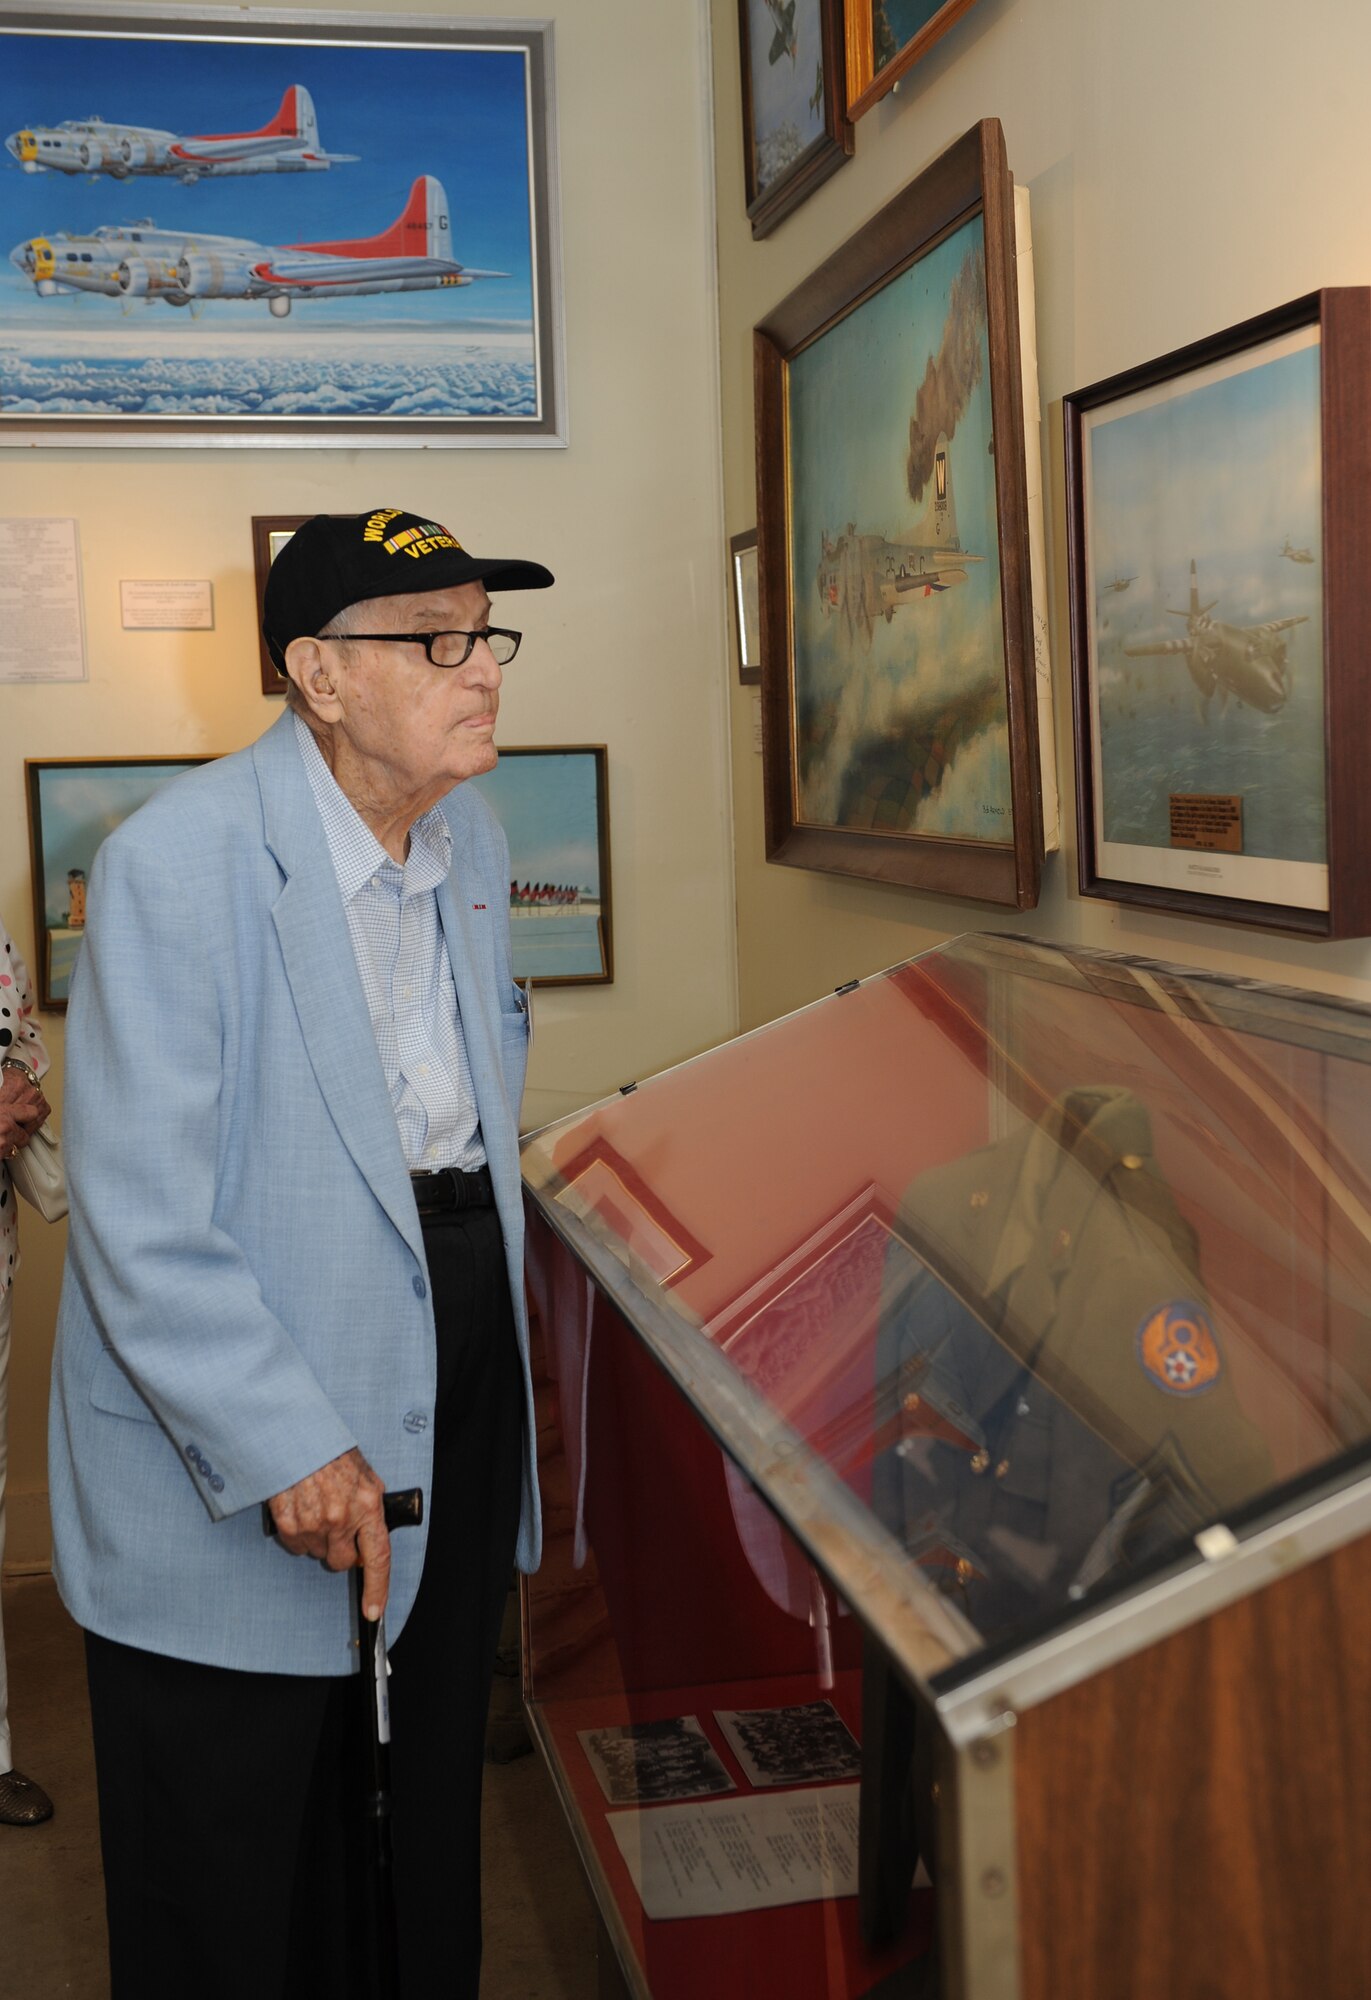 Bataan Death March survivor William Adair views paintings and displays at the 8th Air Force Museum on Barksdale Air Force Base, La., Sept. 4. Adair and four other survivors who visited Barksdale endured a grueling 70-plus mile march through the Philippines during World War II in 1942. After the march, many were kept in internment camps for years as prisoners of war before being released. (U.S. Air Force photo/Airman 1st Class Benjamin Gonsier)(RELEASED)